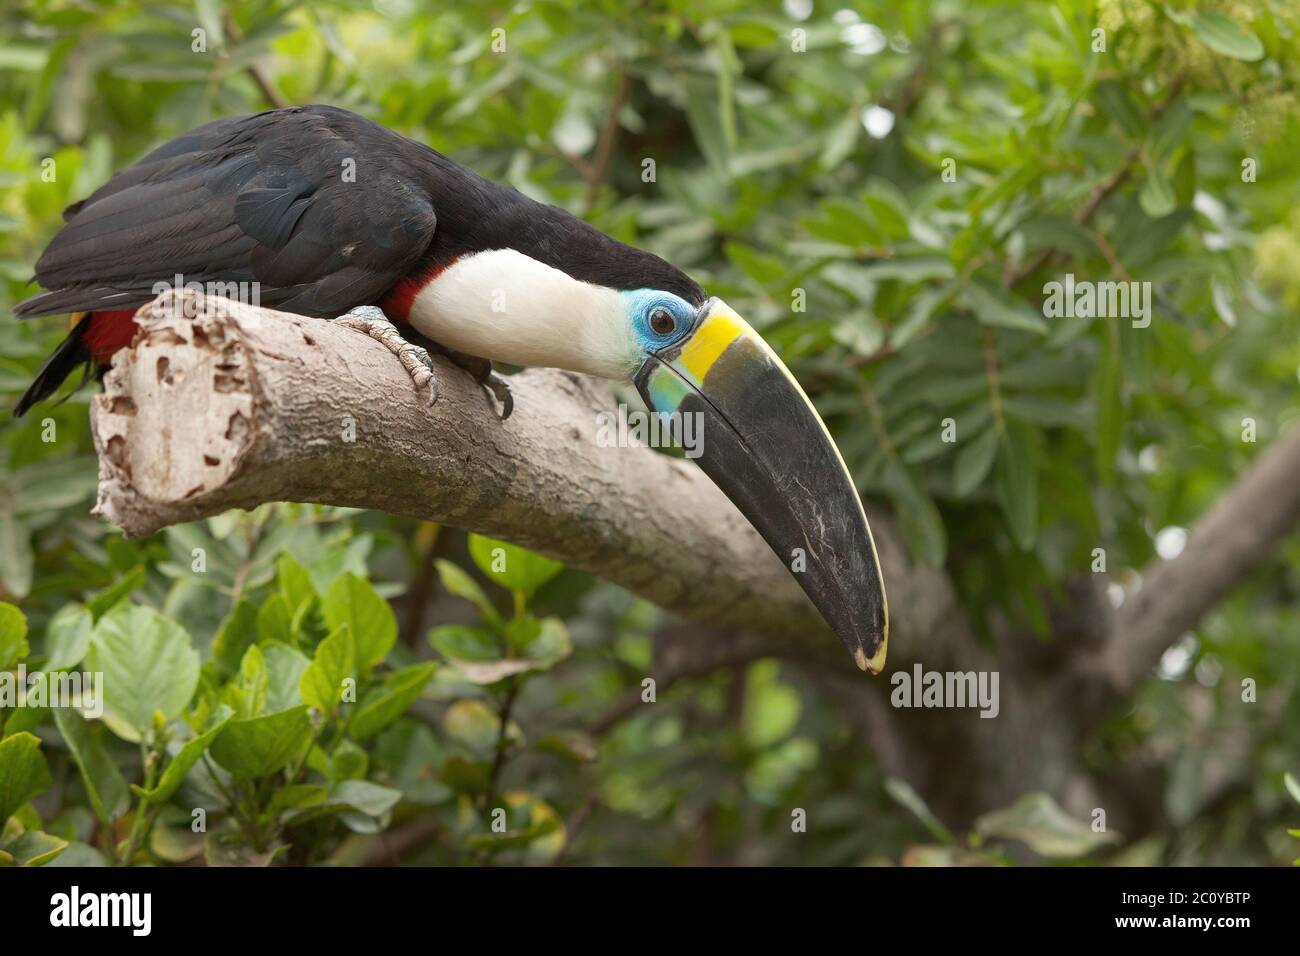 Toucan sitting on tree branch in tropical forest or jungle. Stock Photo